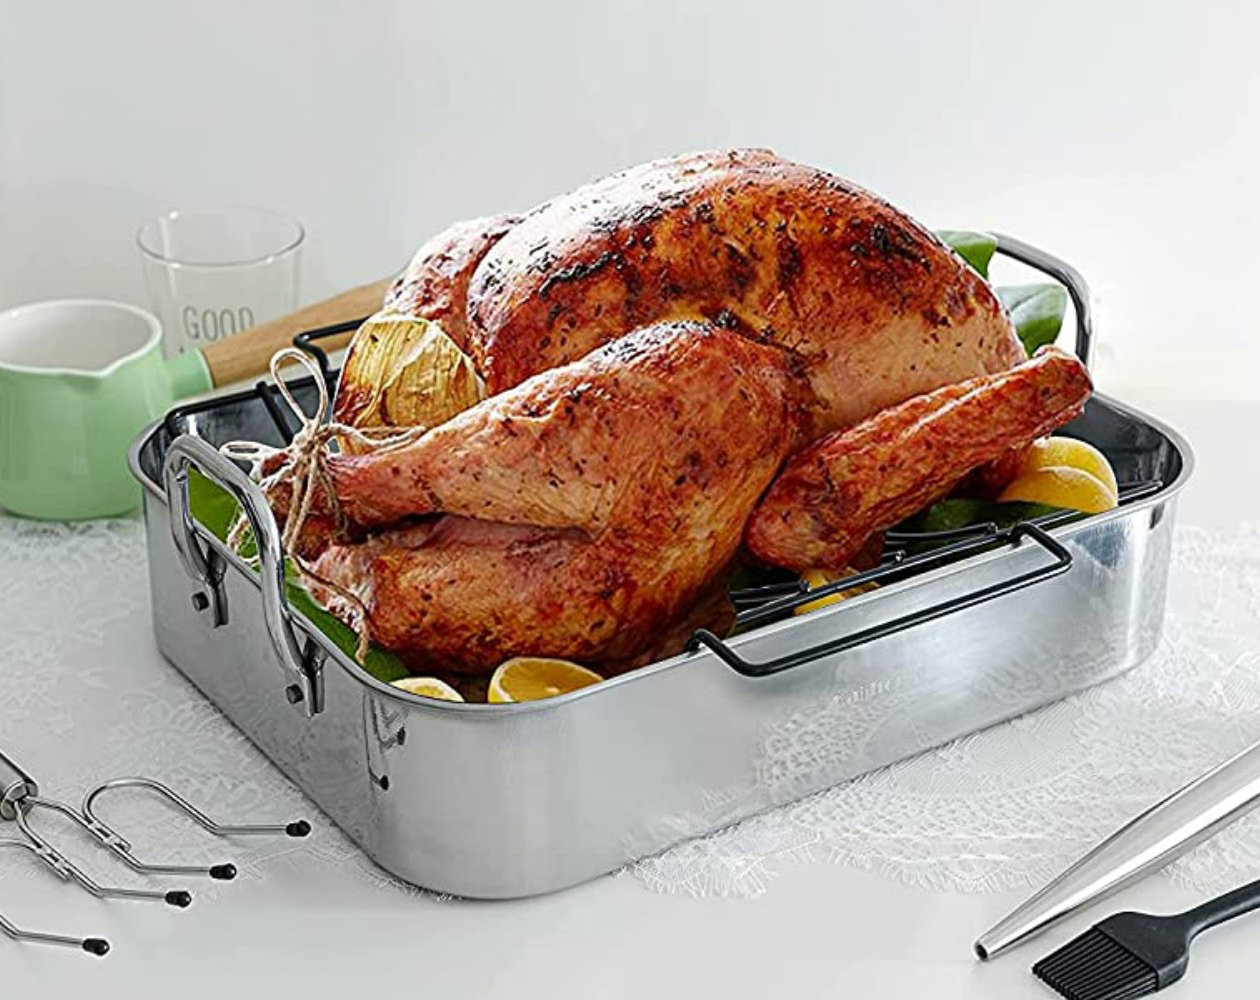 Die Cast Aluminum Non-Stick Turkey Pot / Roaster with Aluminum Cover -  China Kitchenware and Cookware price